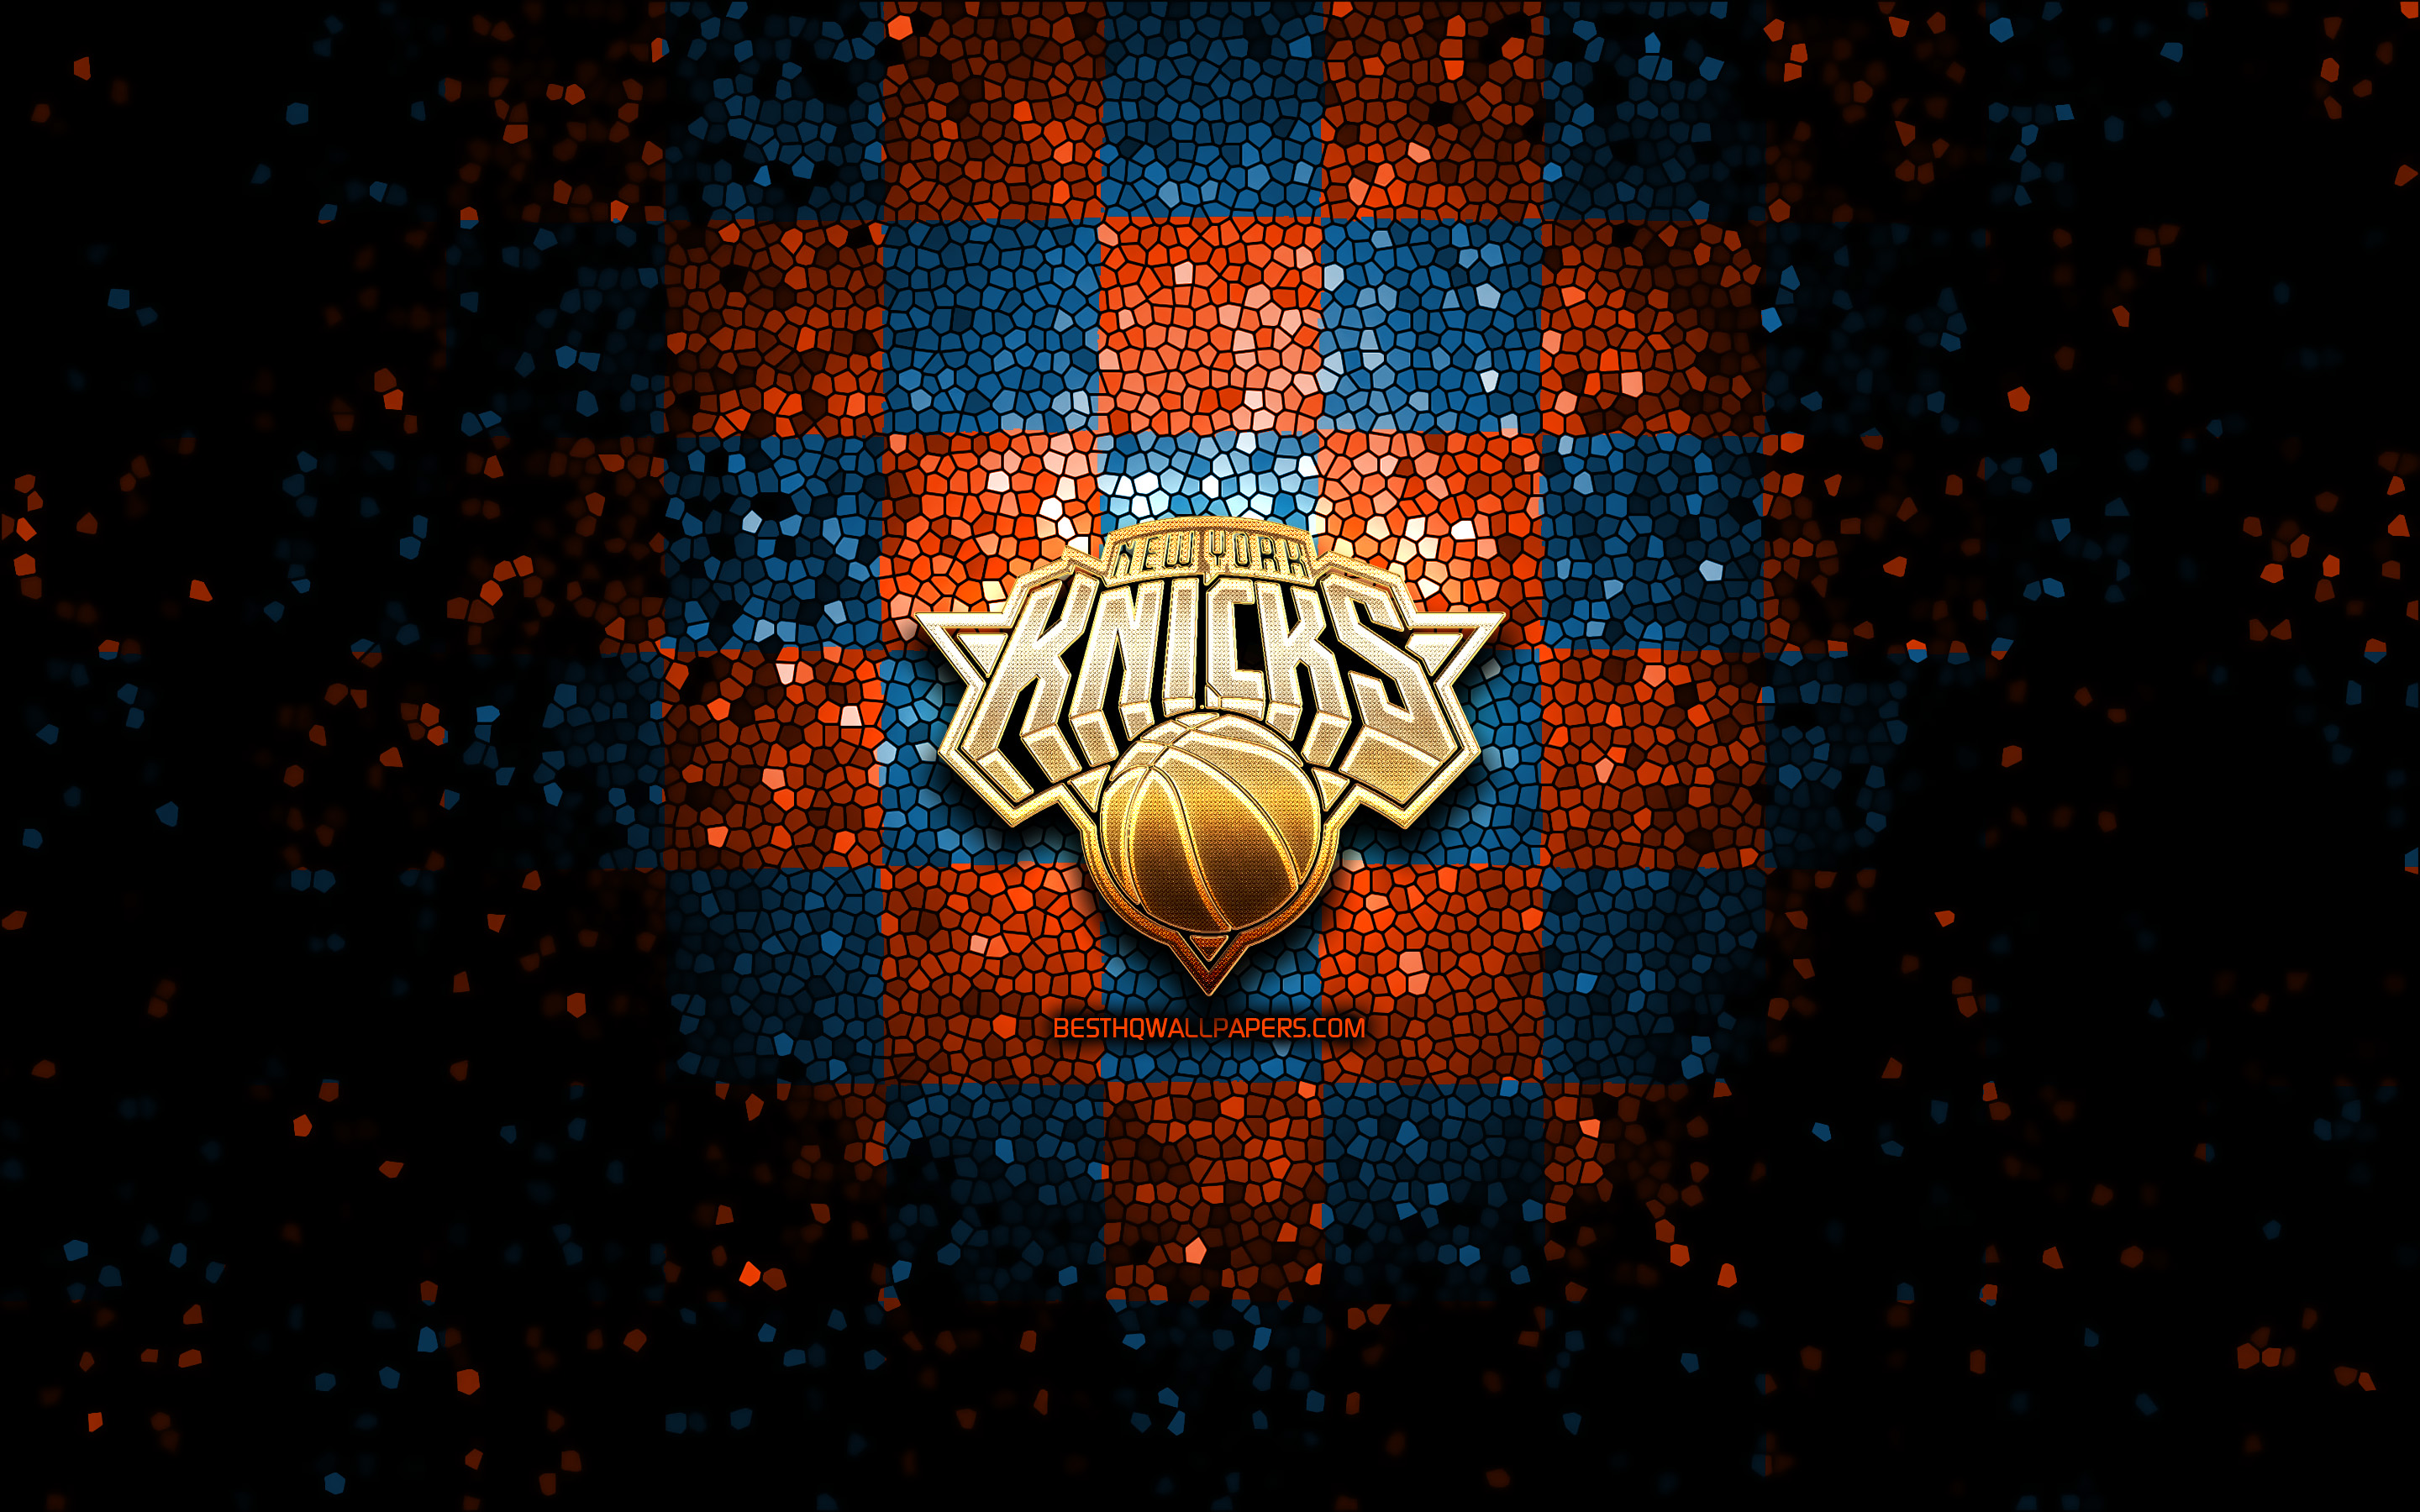 New York Knicks  Make your wallpaper Mook friendly  Squarespace    cheligfxInstagram  Facebook